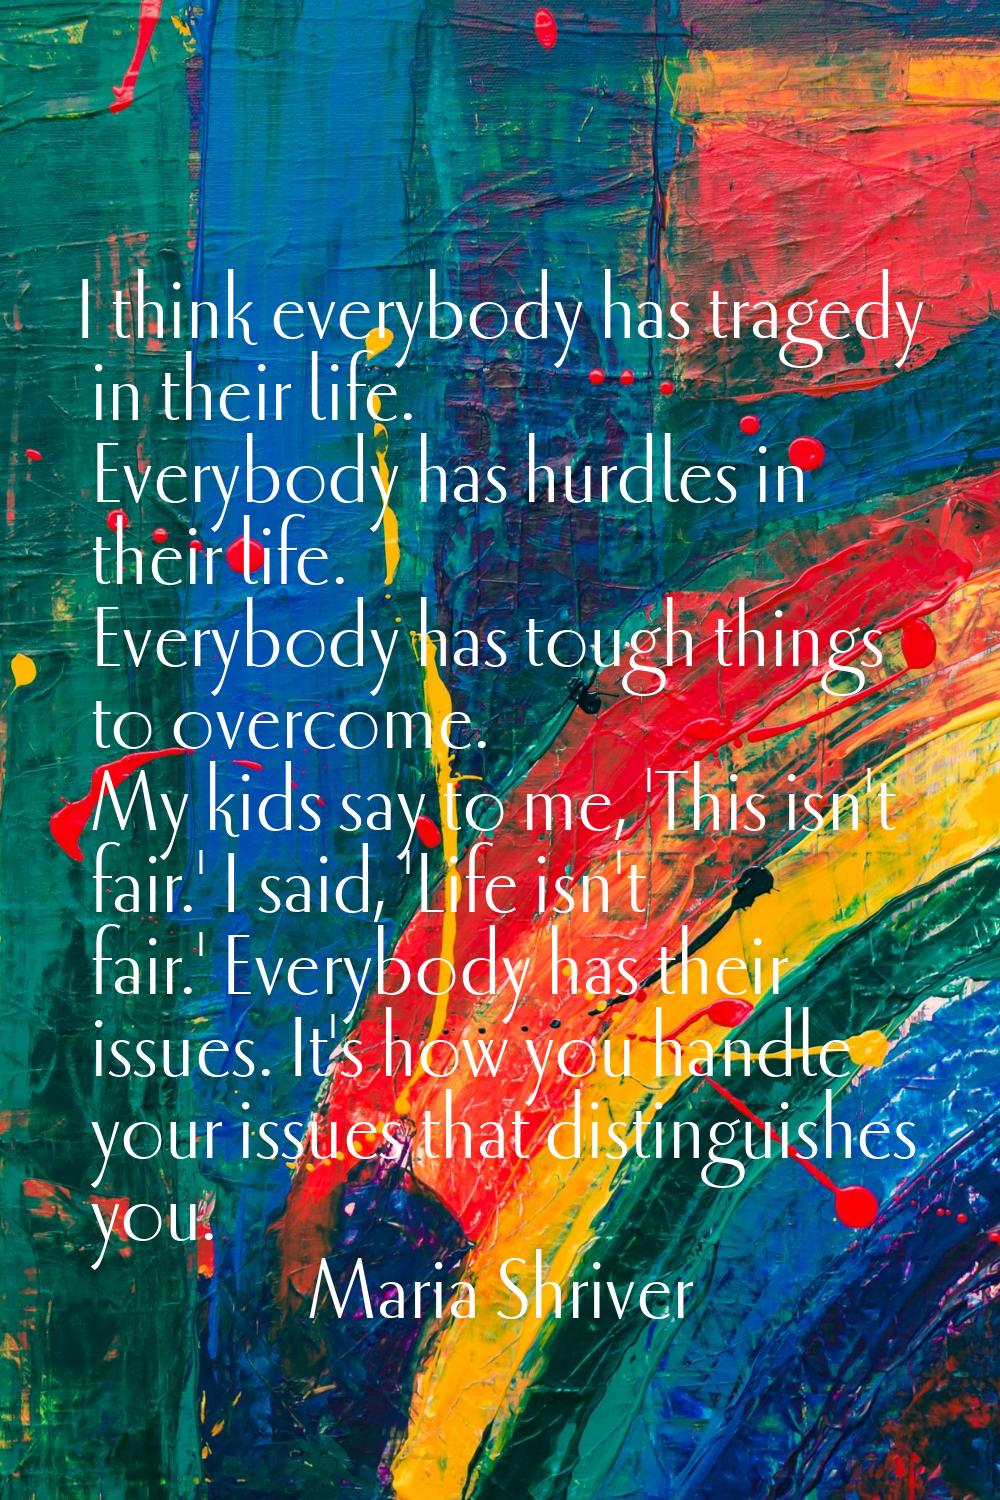 I think everybody has tragedy in their life. Everybody has hurdles in their life. Everybody has tou